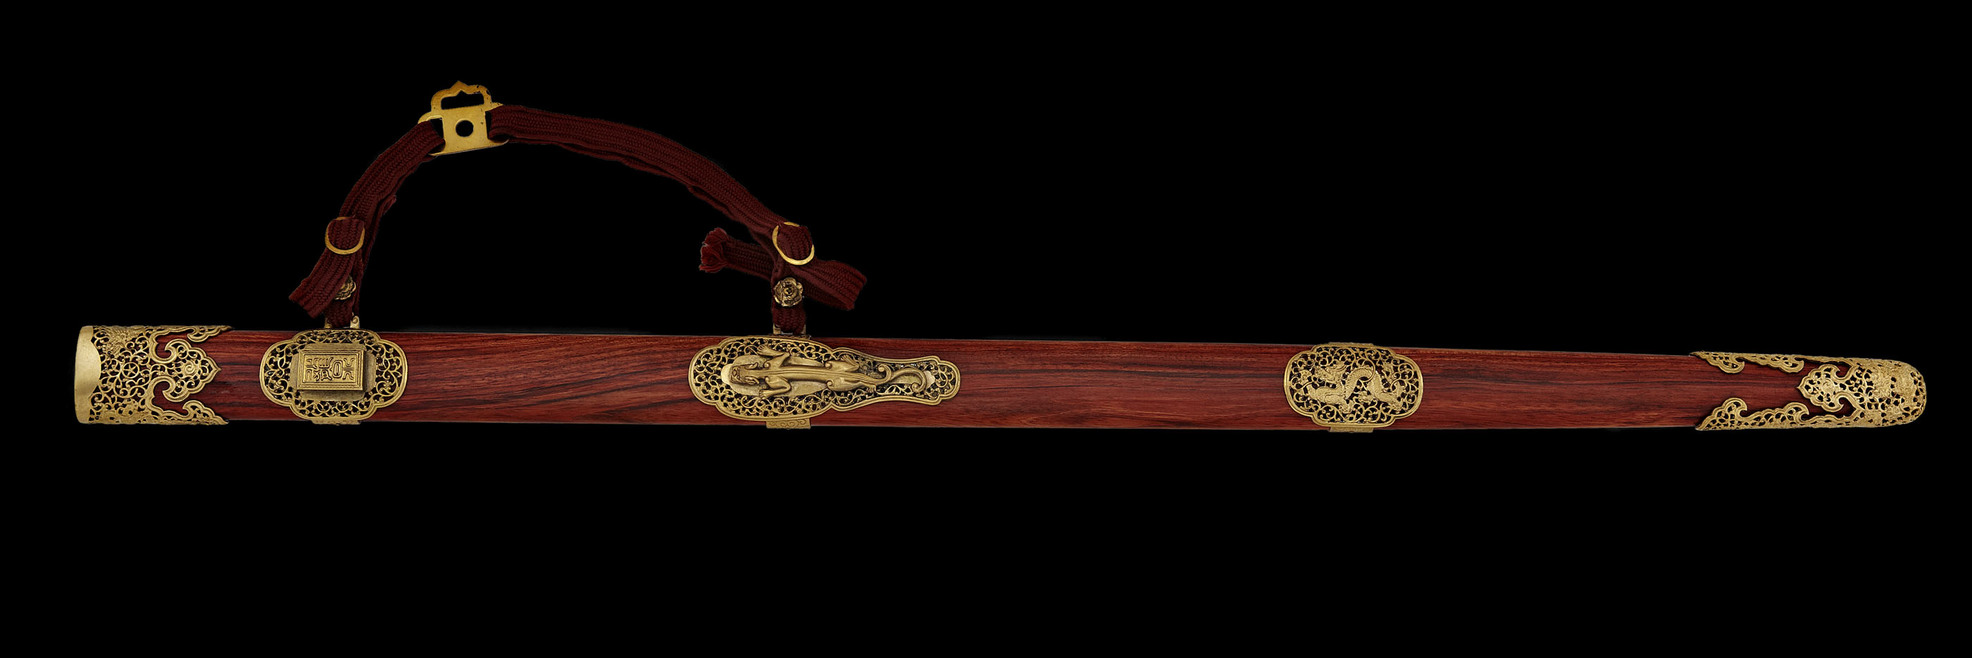 Qianglong Imperial Sword